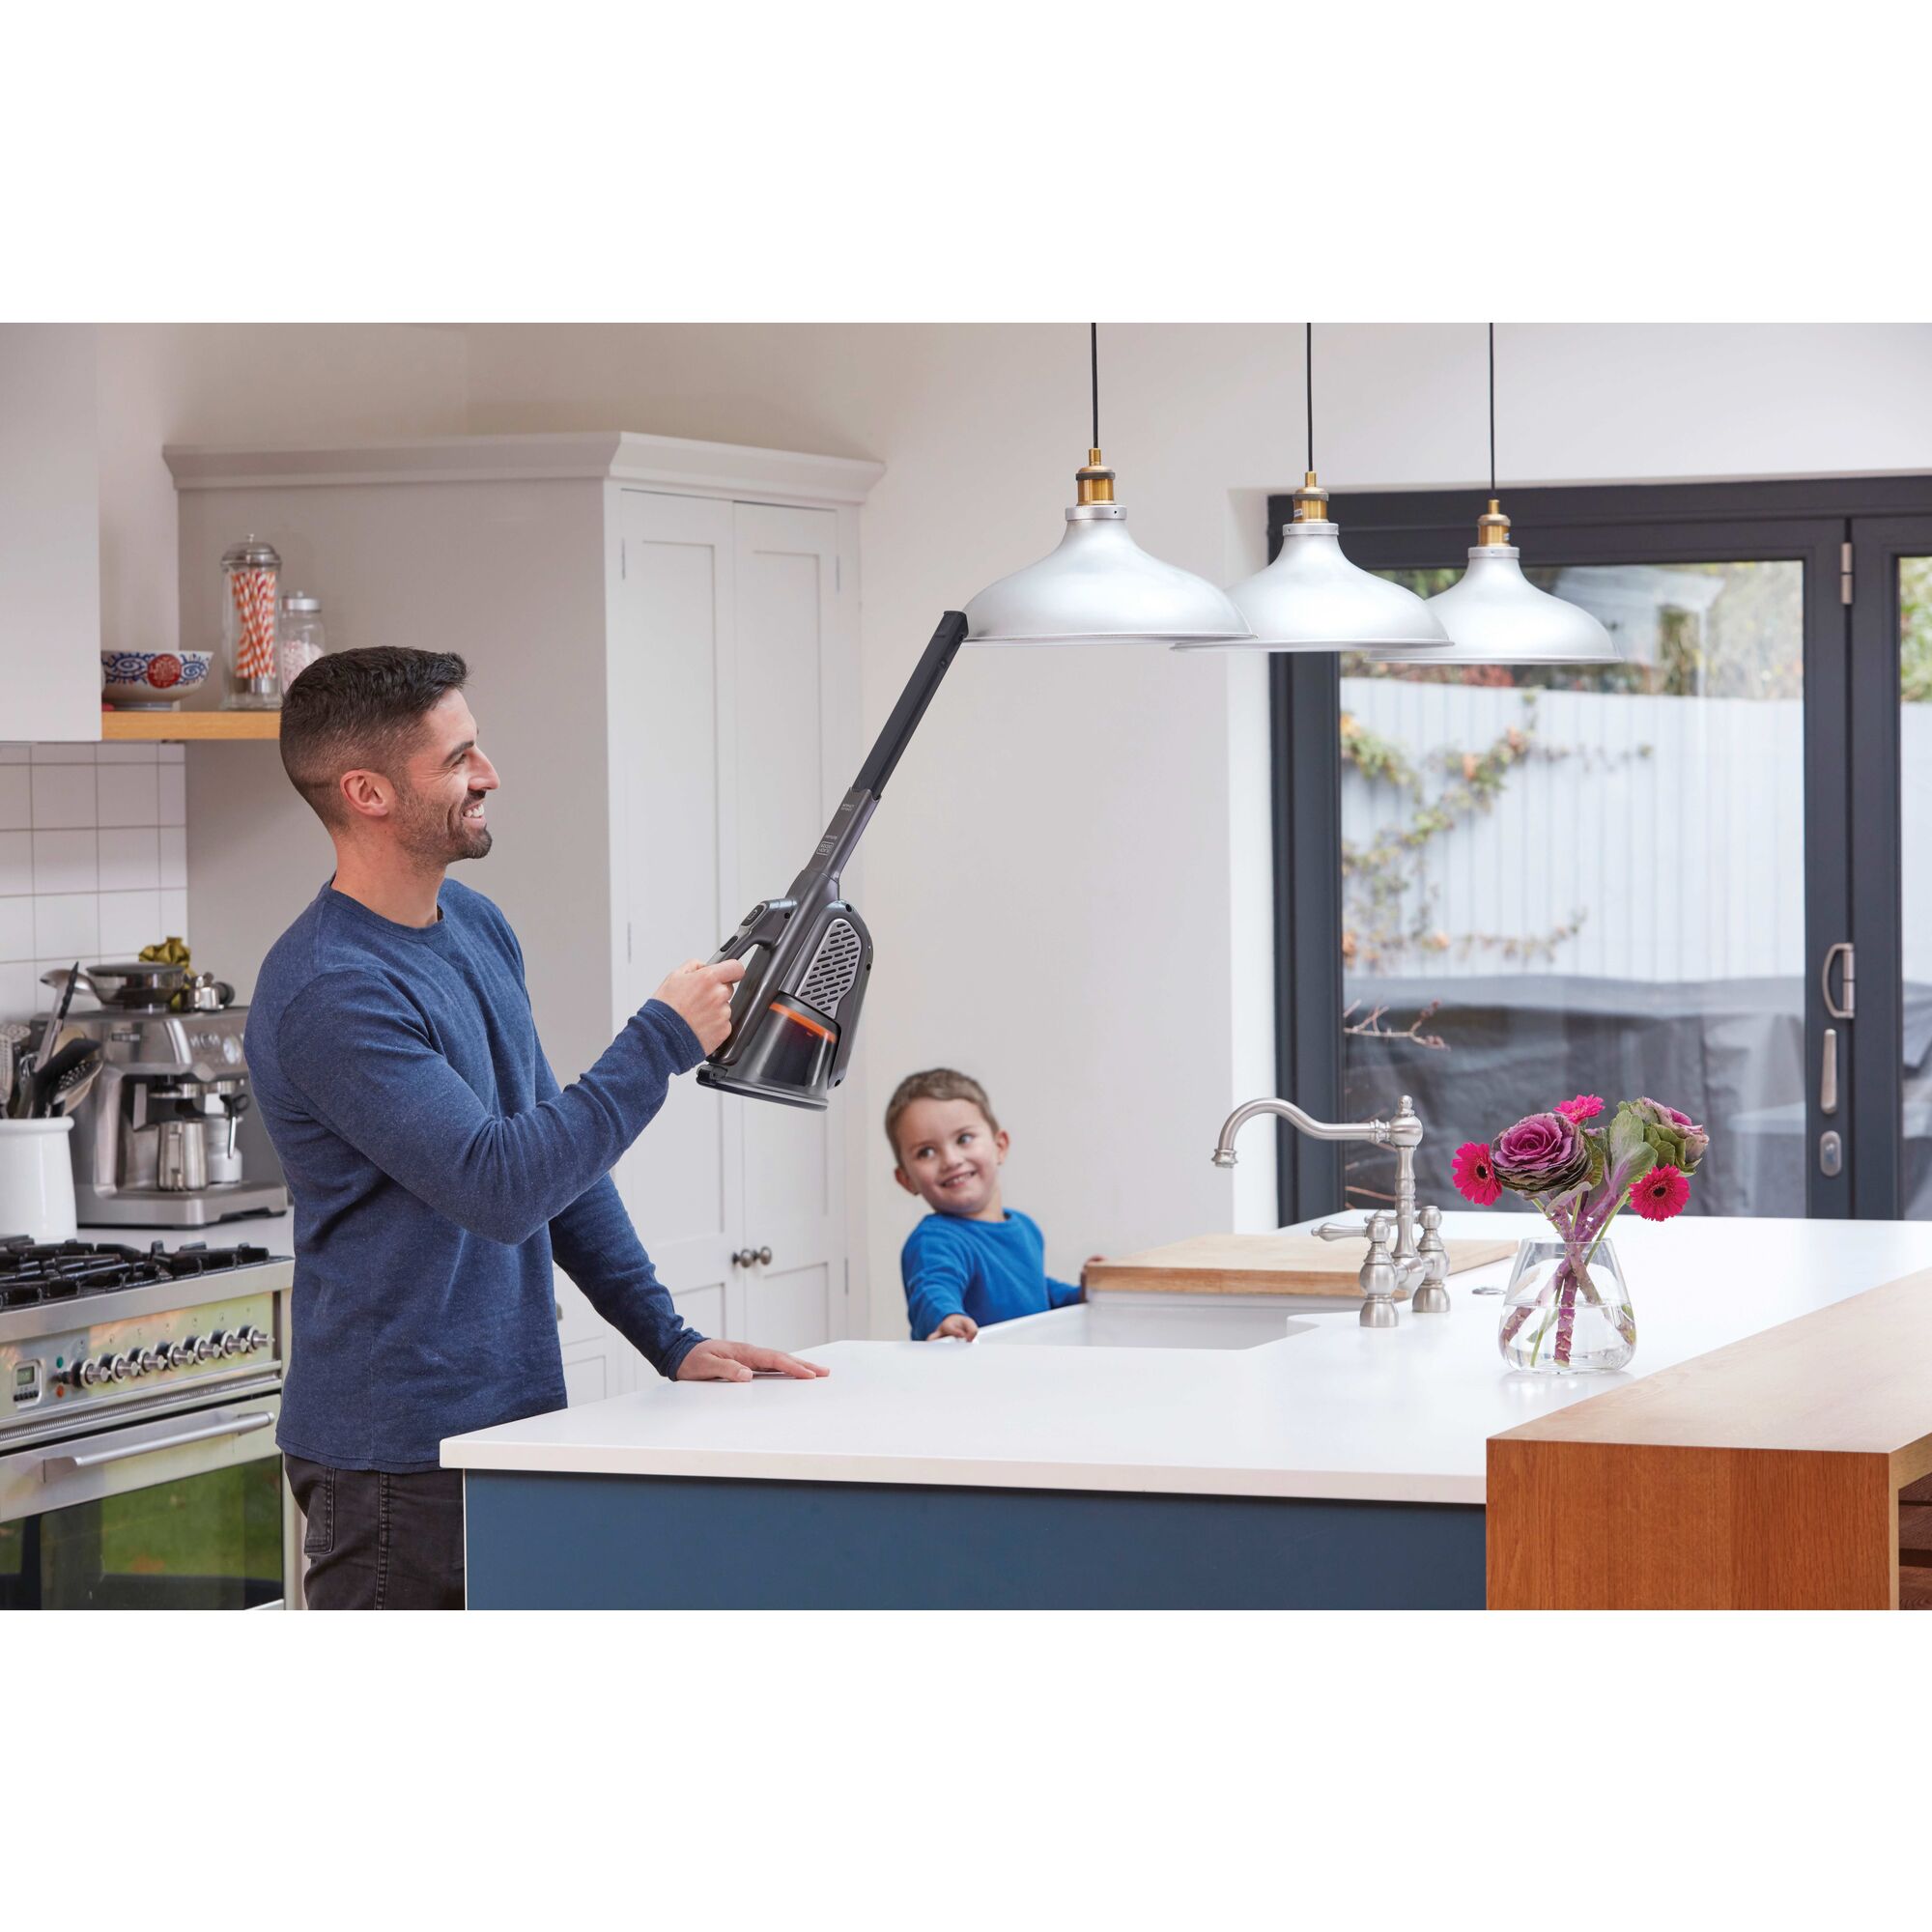 16 Volt Dust buster Advanced Clean Hand Vacuum being used by a person on hanging lights.